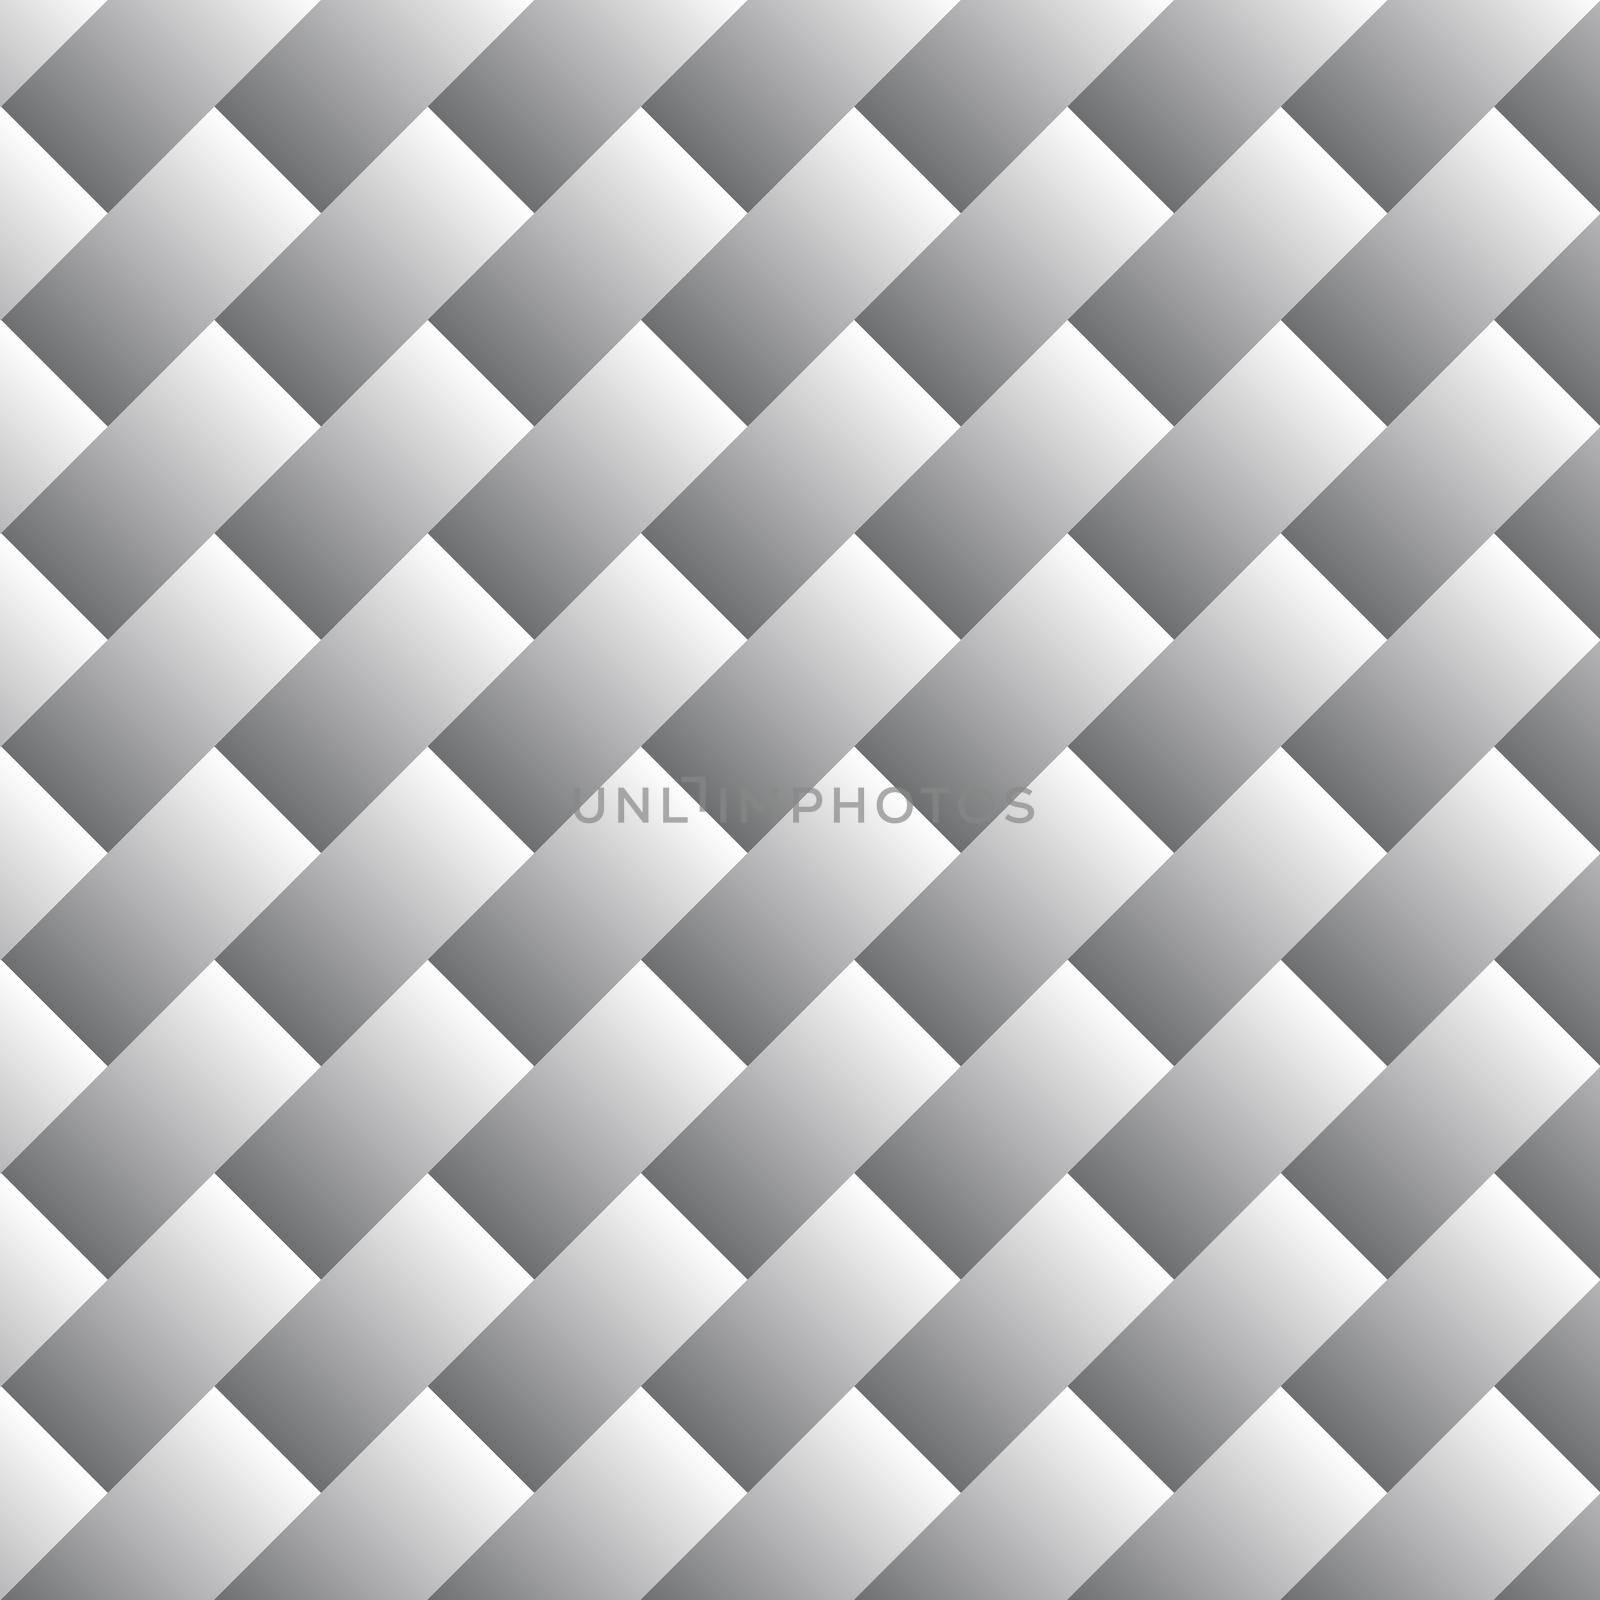 Diagonal gray gradient seamless texture. Modern stylish pattern sequence of weaving strips. Monochrome geometric ornament laying rectangles. Jpeg illustration.